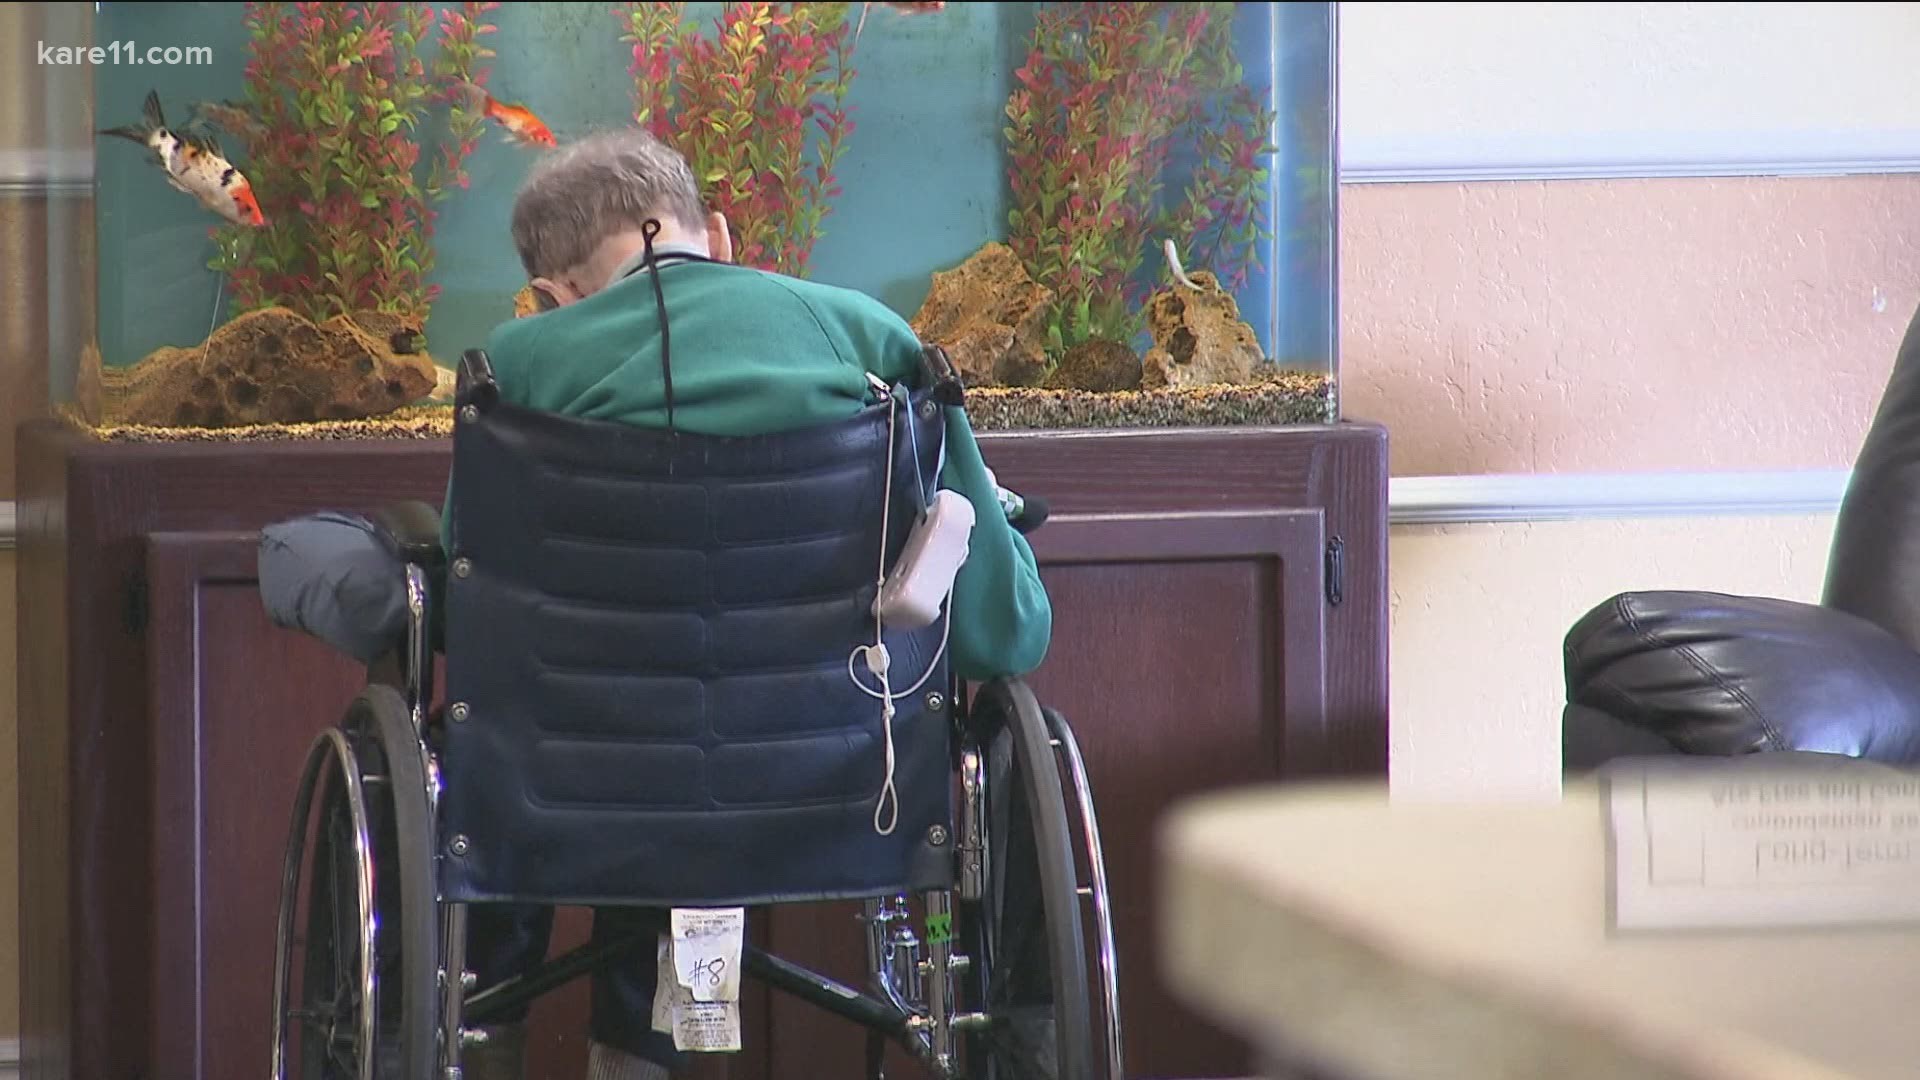 Statistics also show a 12% jump in Alzheimer's deaths in Minnesota last year, a trend that could be due to a dip in medical care for other issues or social isolation